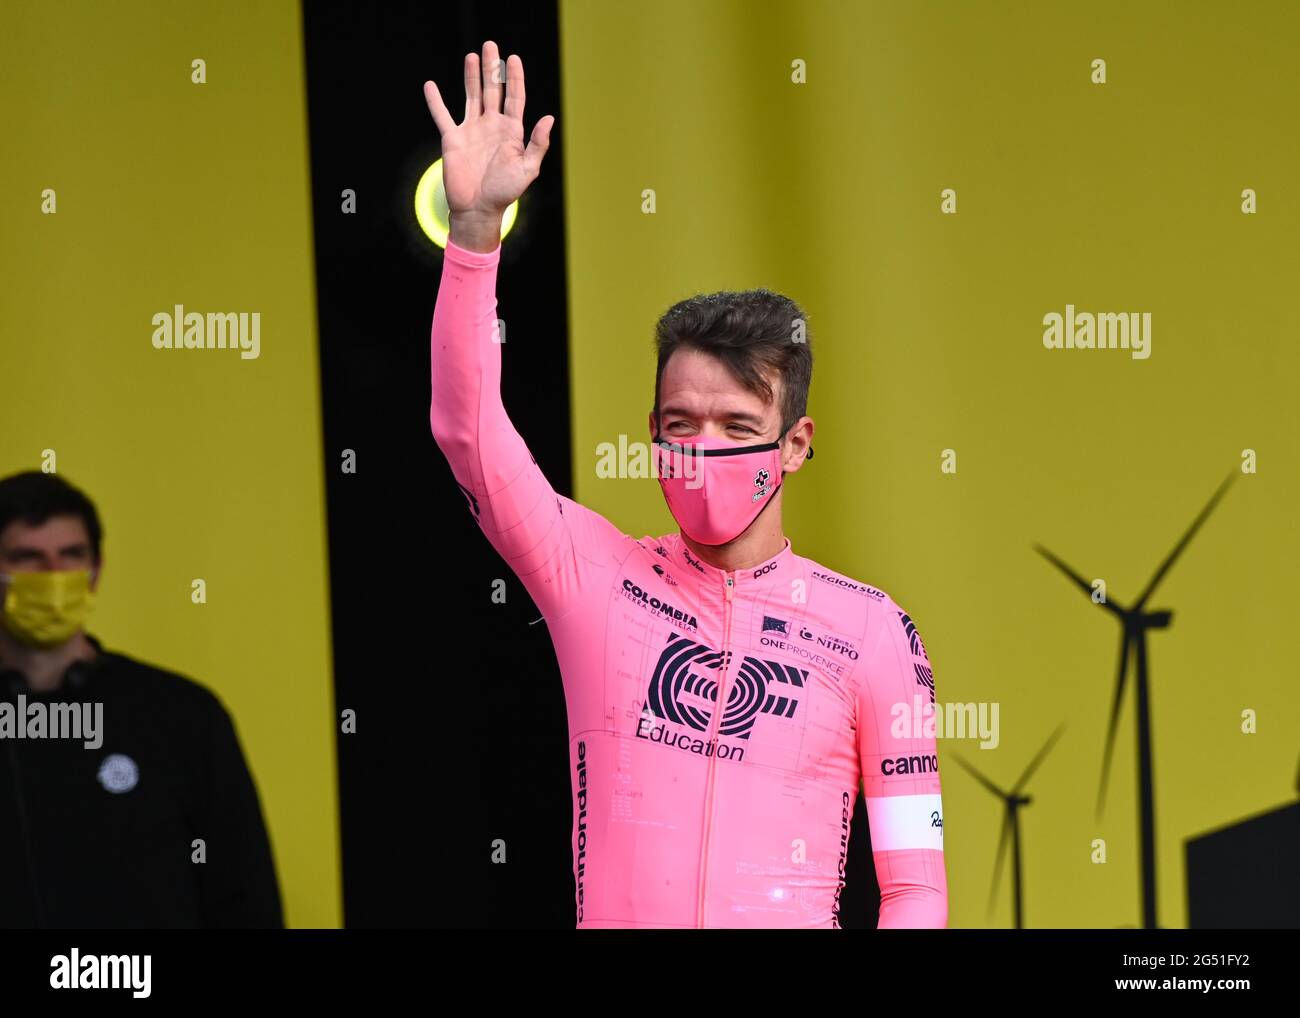 Brest, France. 24th June, 2021. rigoberto uran of EF EDUCATION - NIPPO being introduced at the 2021 Tour de France team presentation, Credit:Pete Goding/Alamy Live News Stock Photo